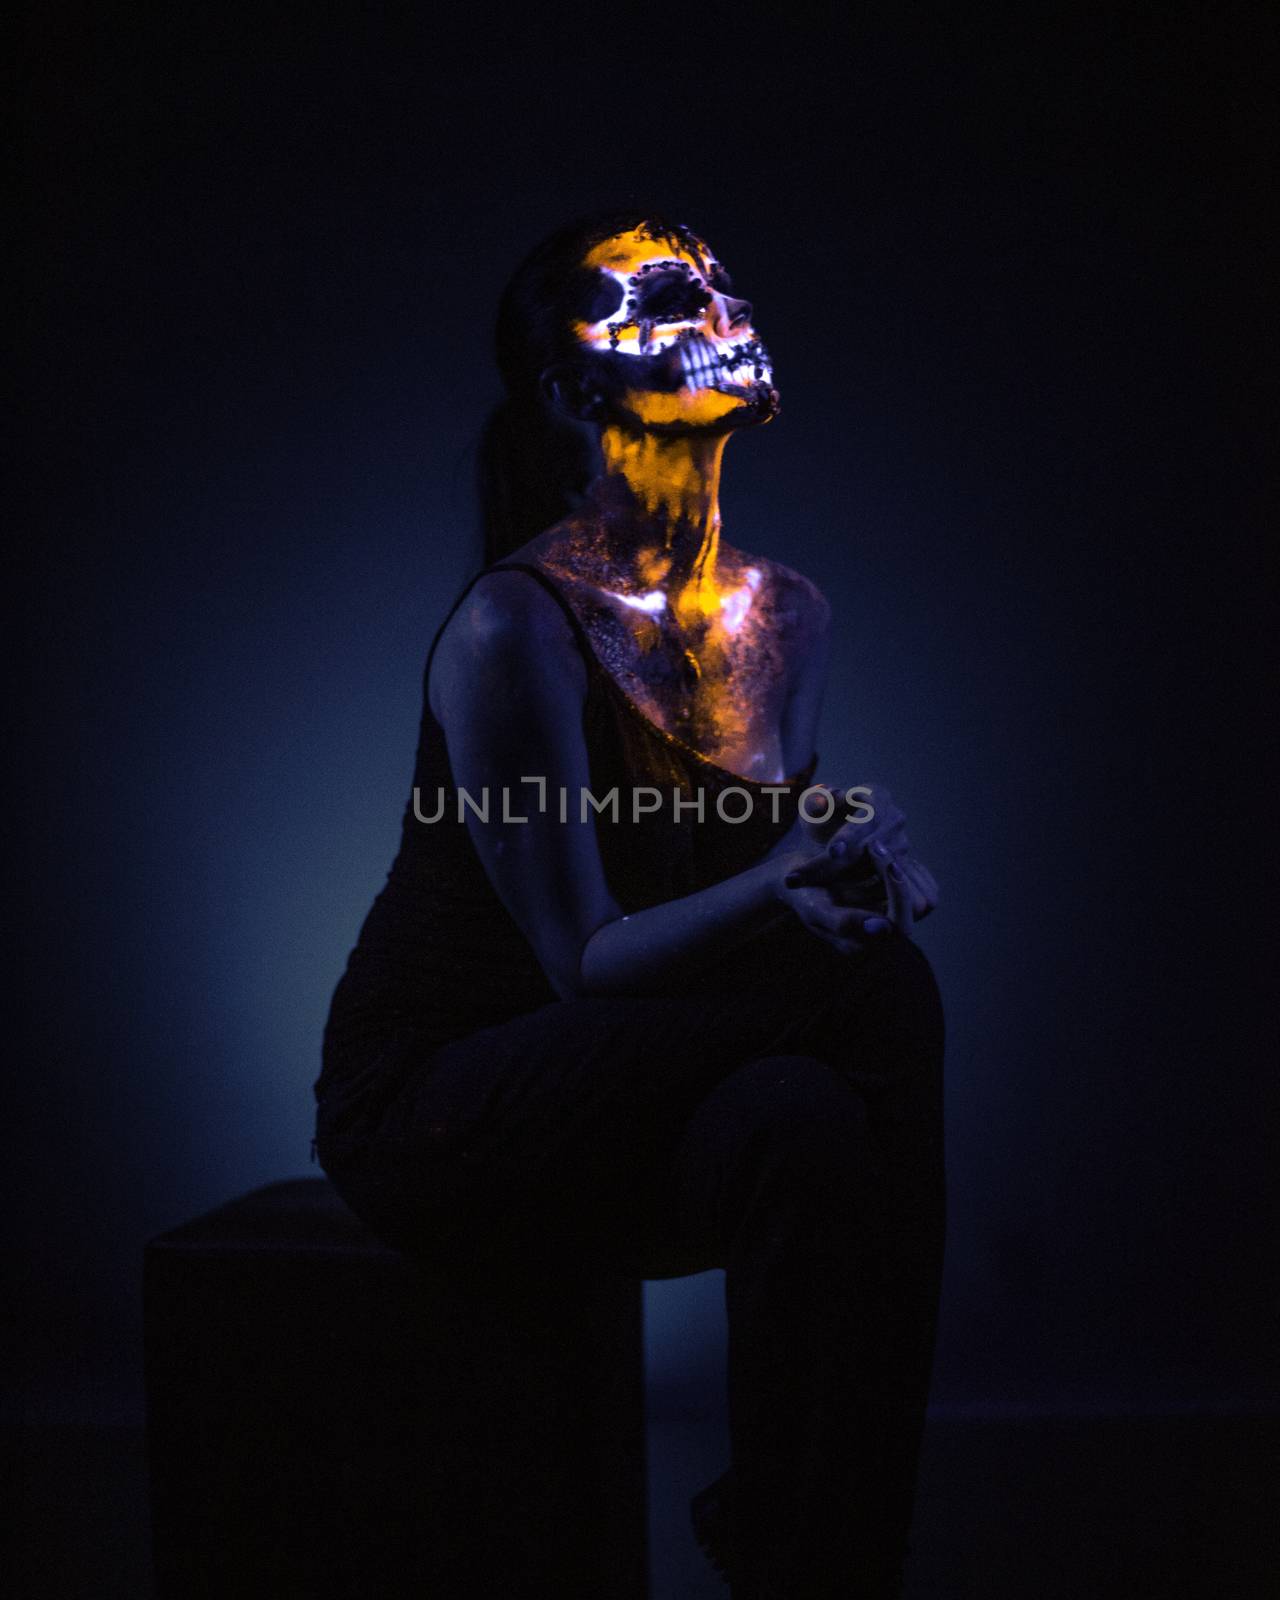 Girl's Face painted in fluorescent UV colors and looks like Neon Glowing Skull